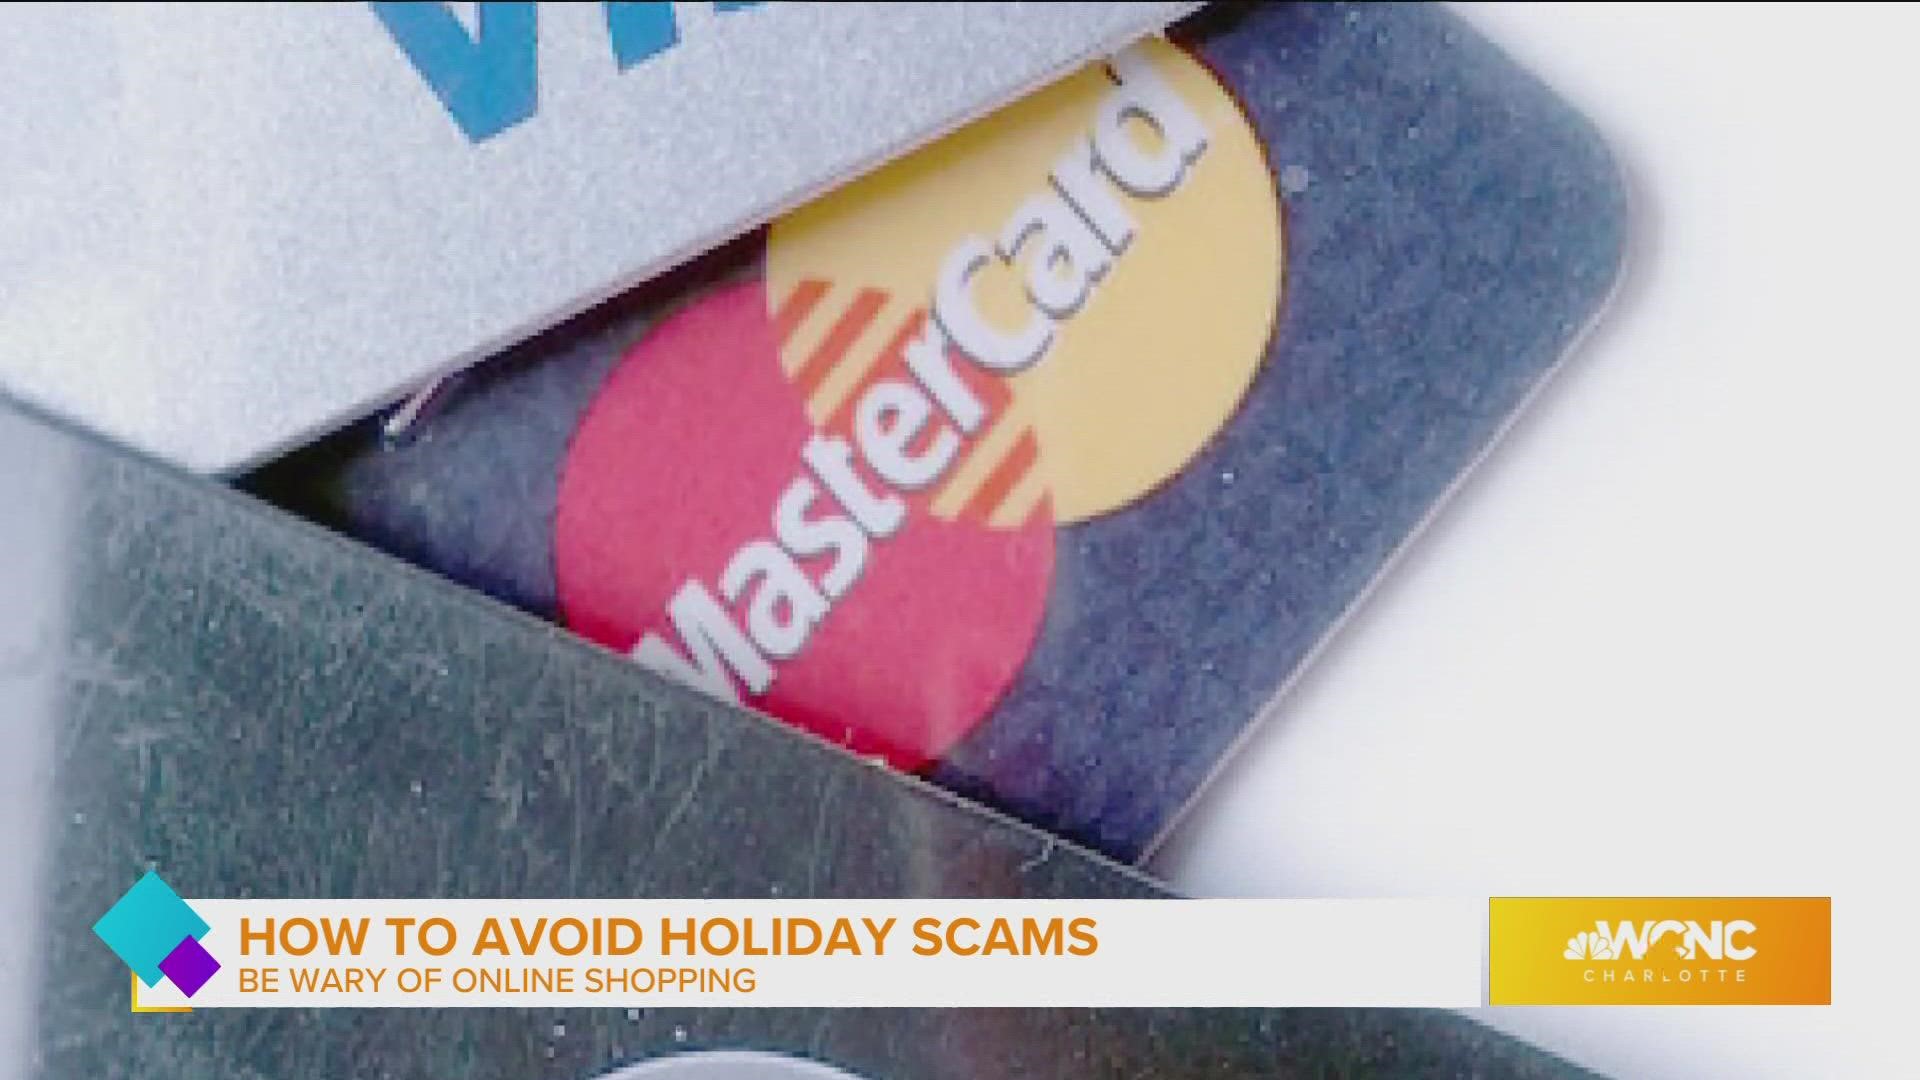 Tips to avoid holiday scams